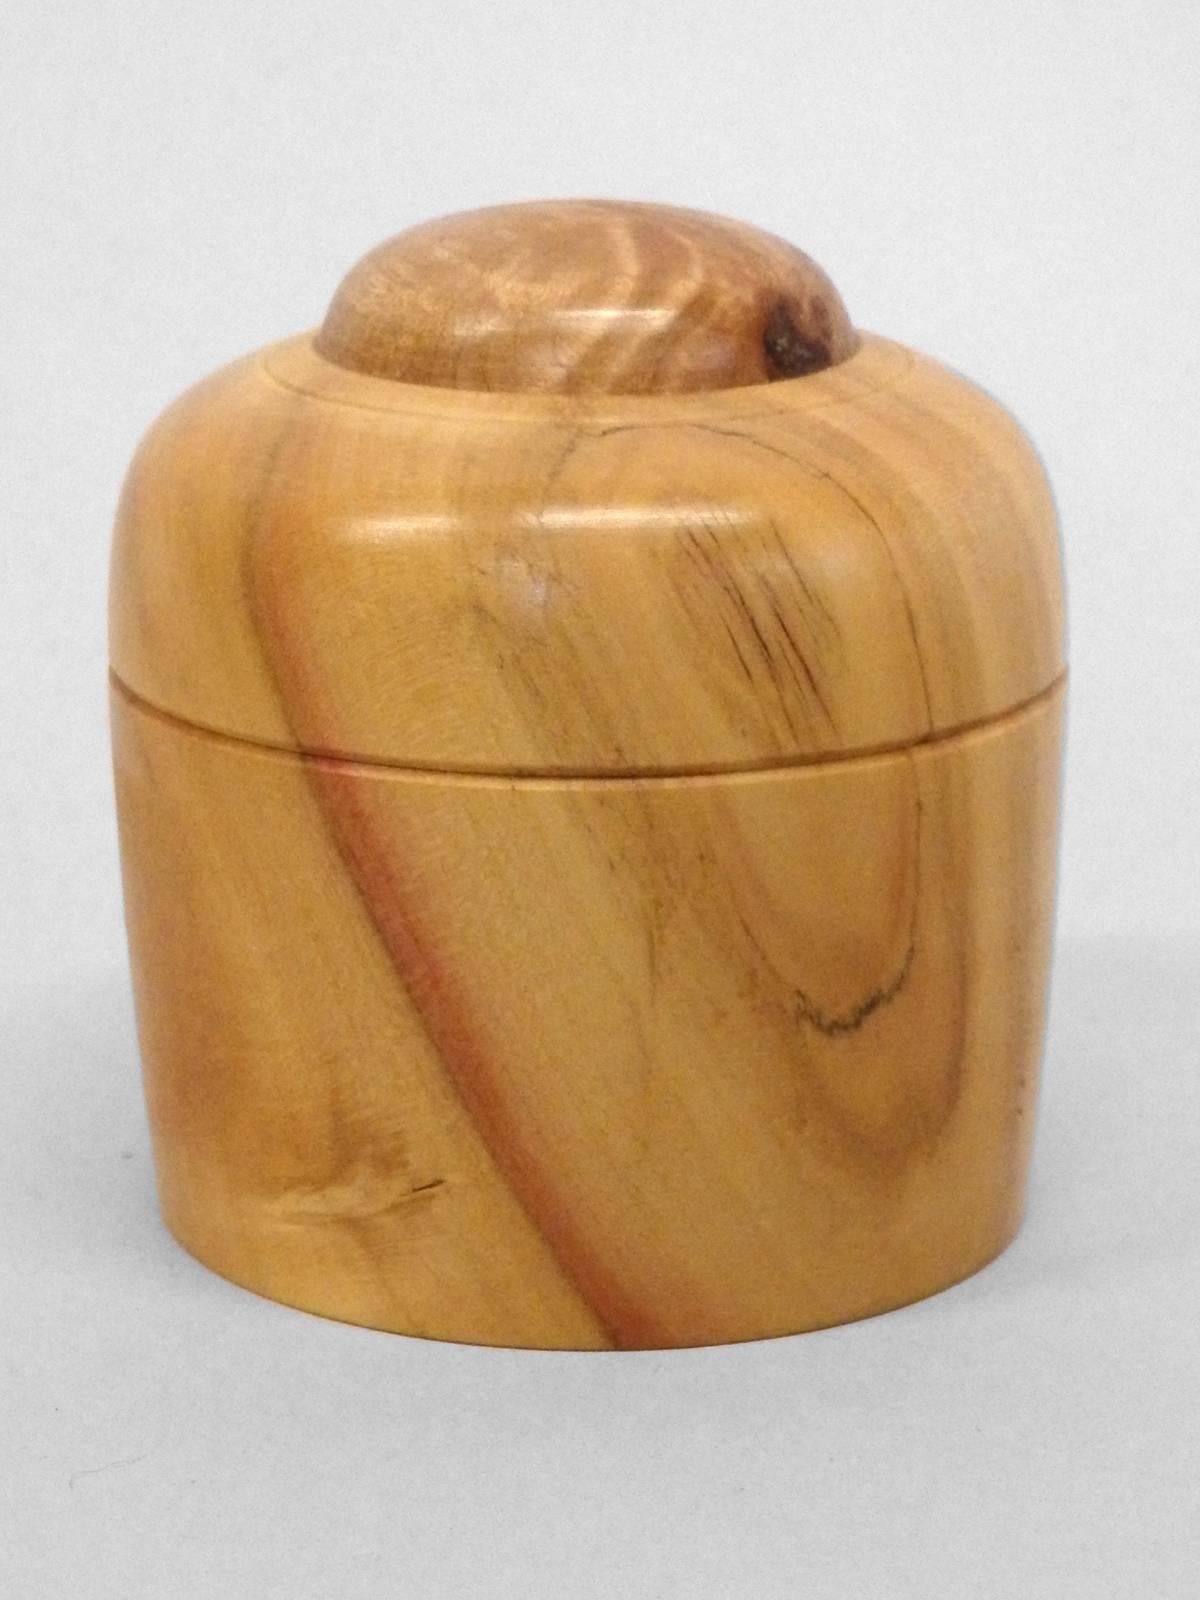 Four Studio Turned Wood Gift Canisters by Steve Sharpe For Sale 1